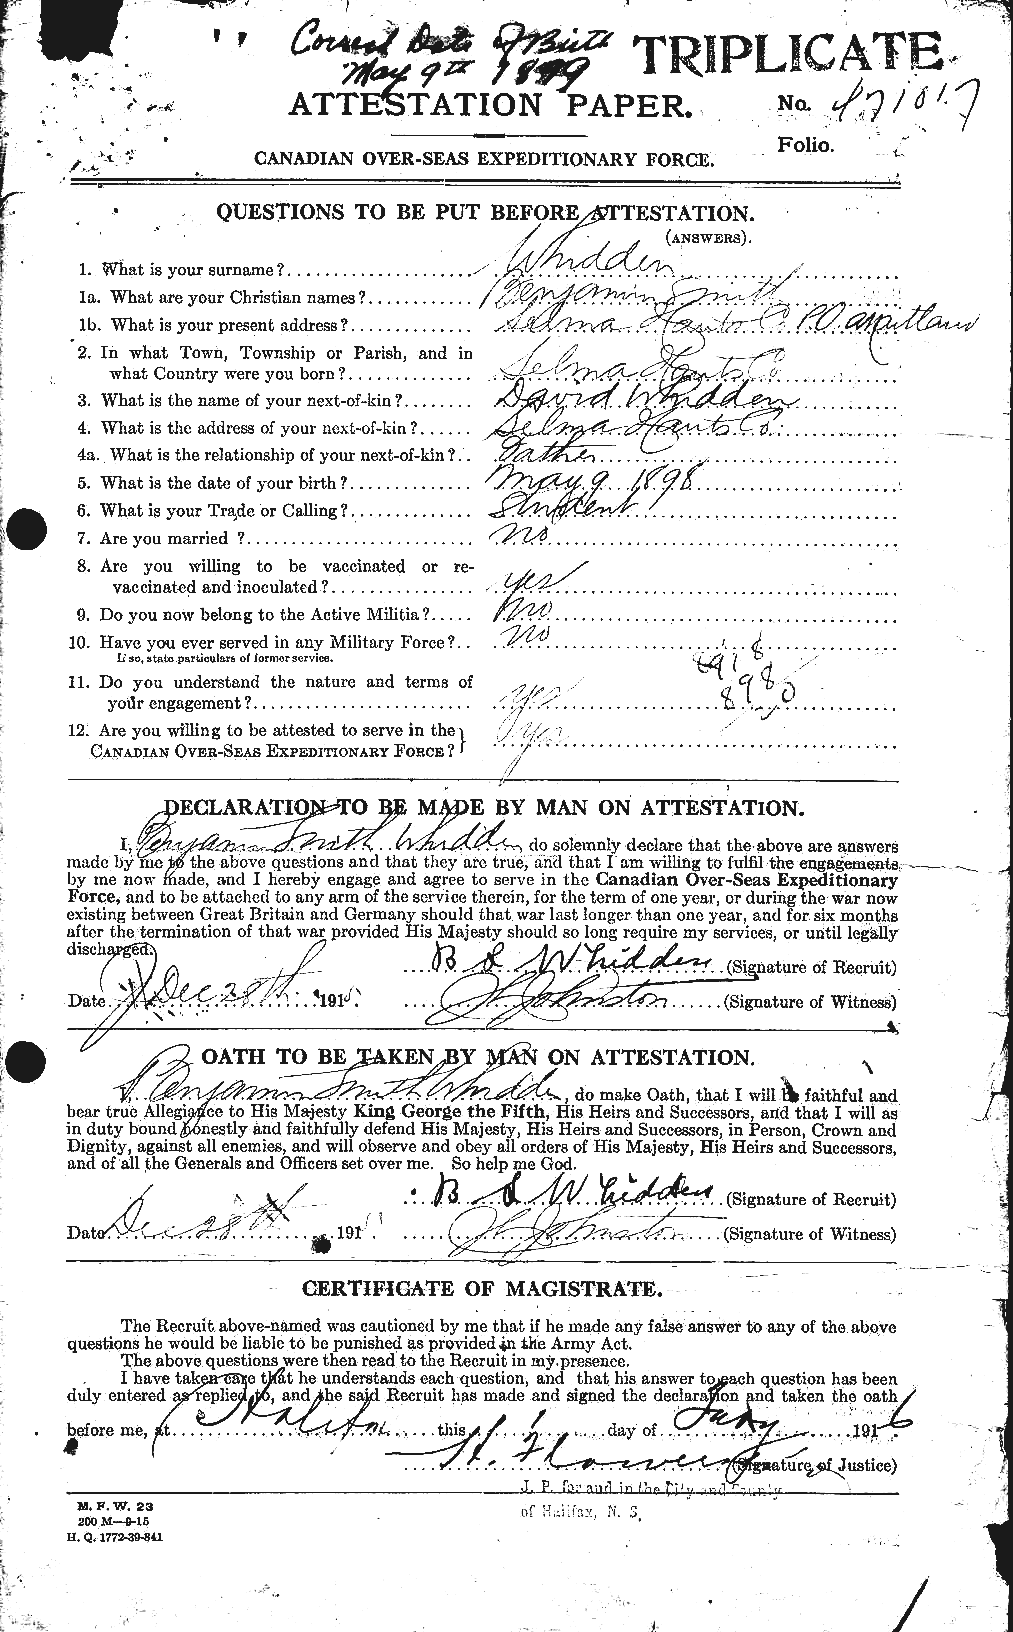 Personnel Records of the First World War - CEF 668657a